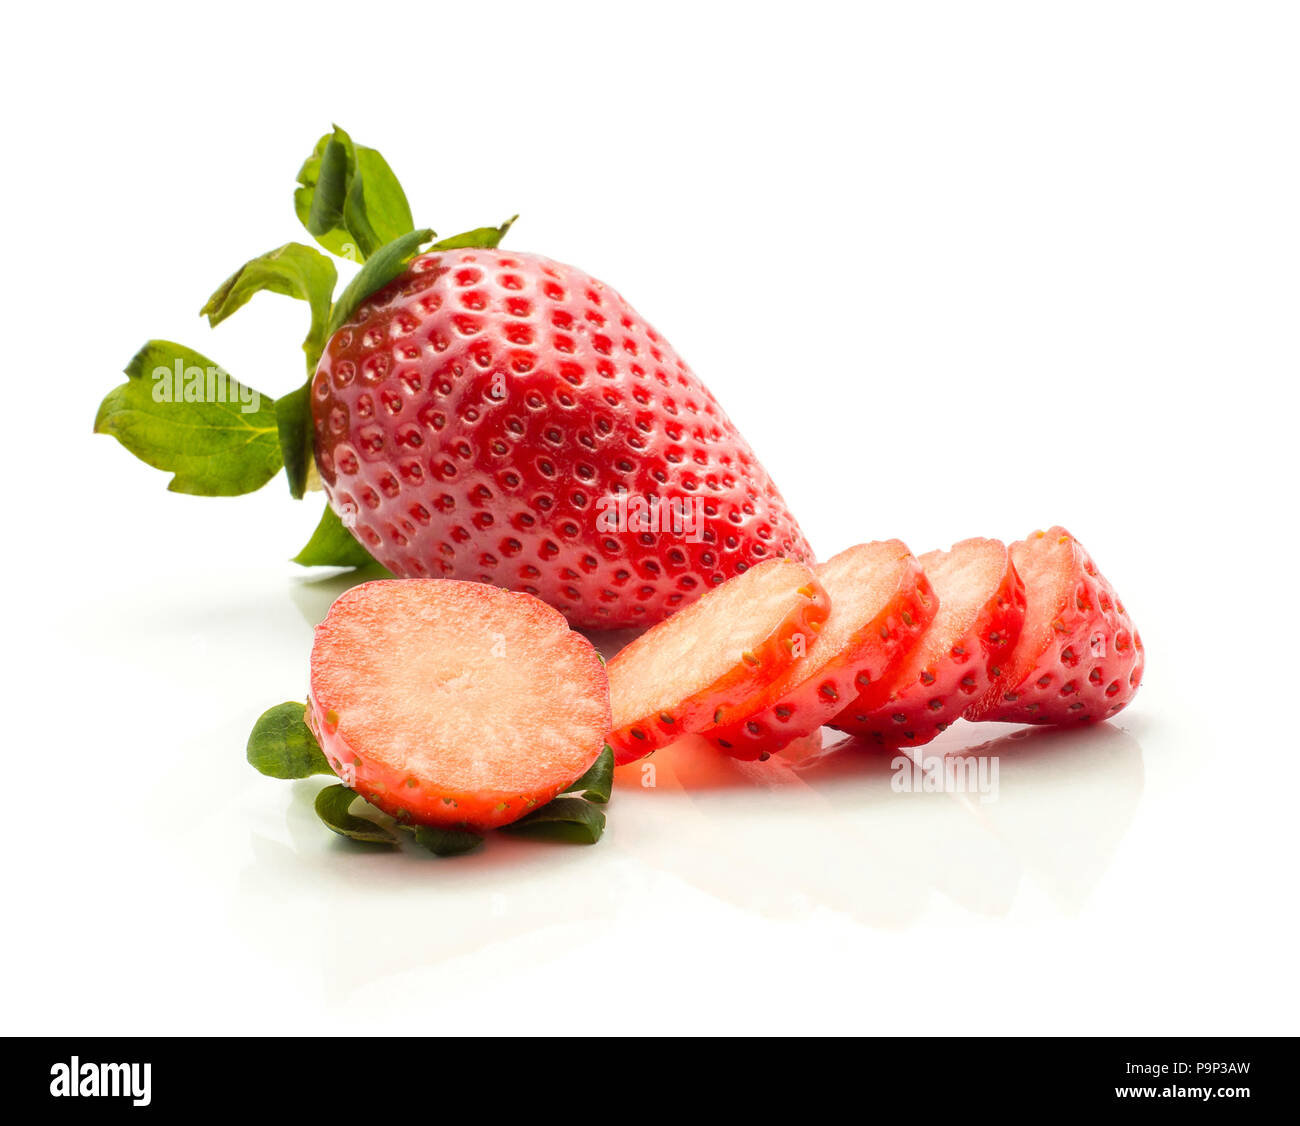 Garden strawberry and one sliced in circles isolated on white background Stock Photo